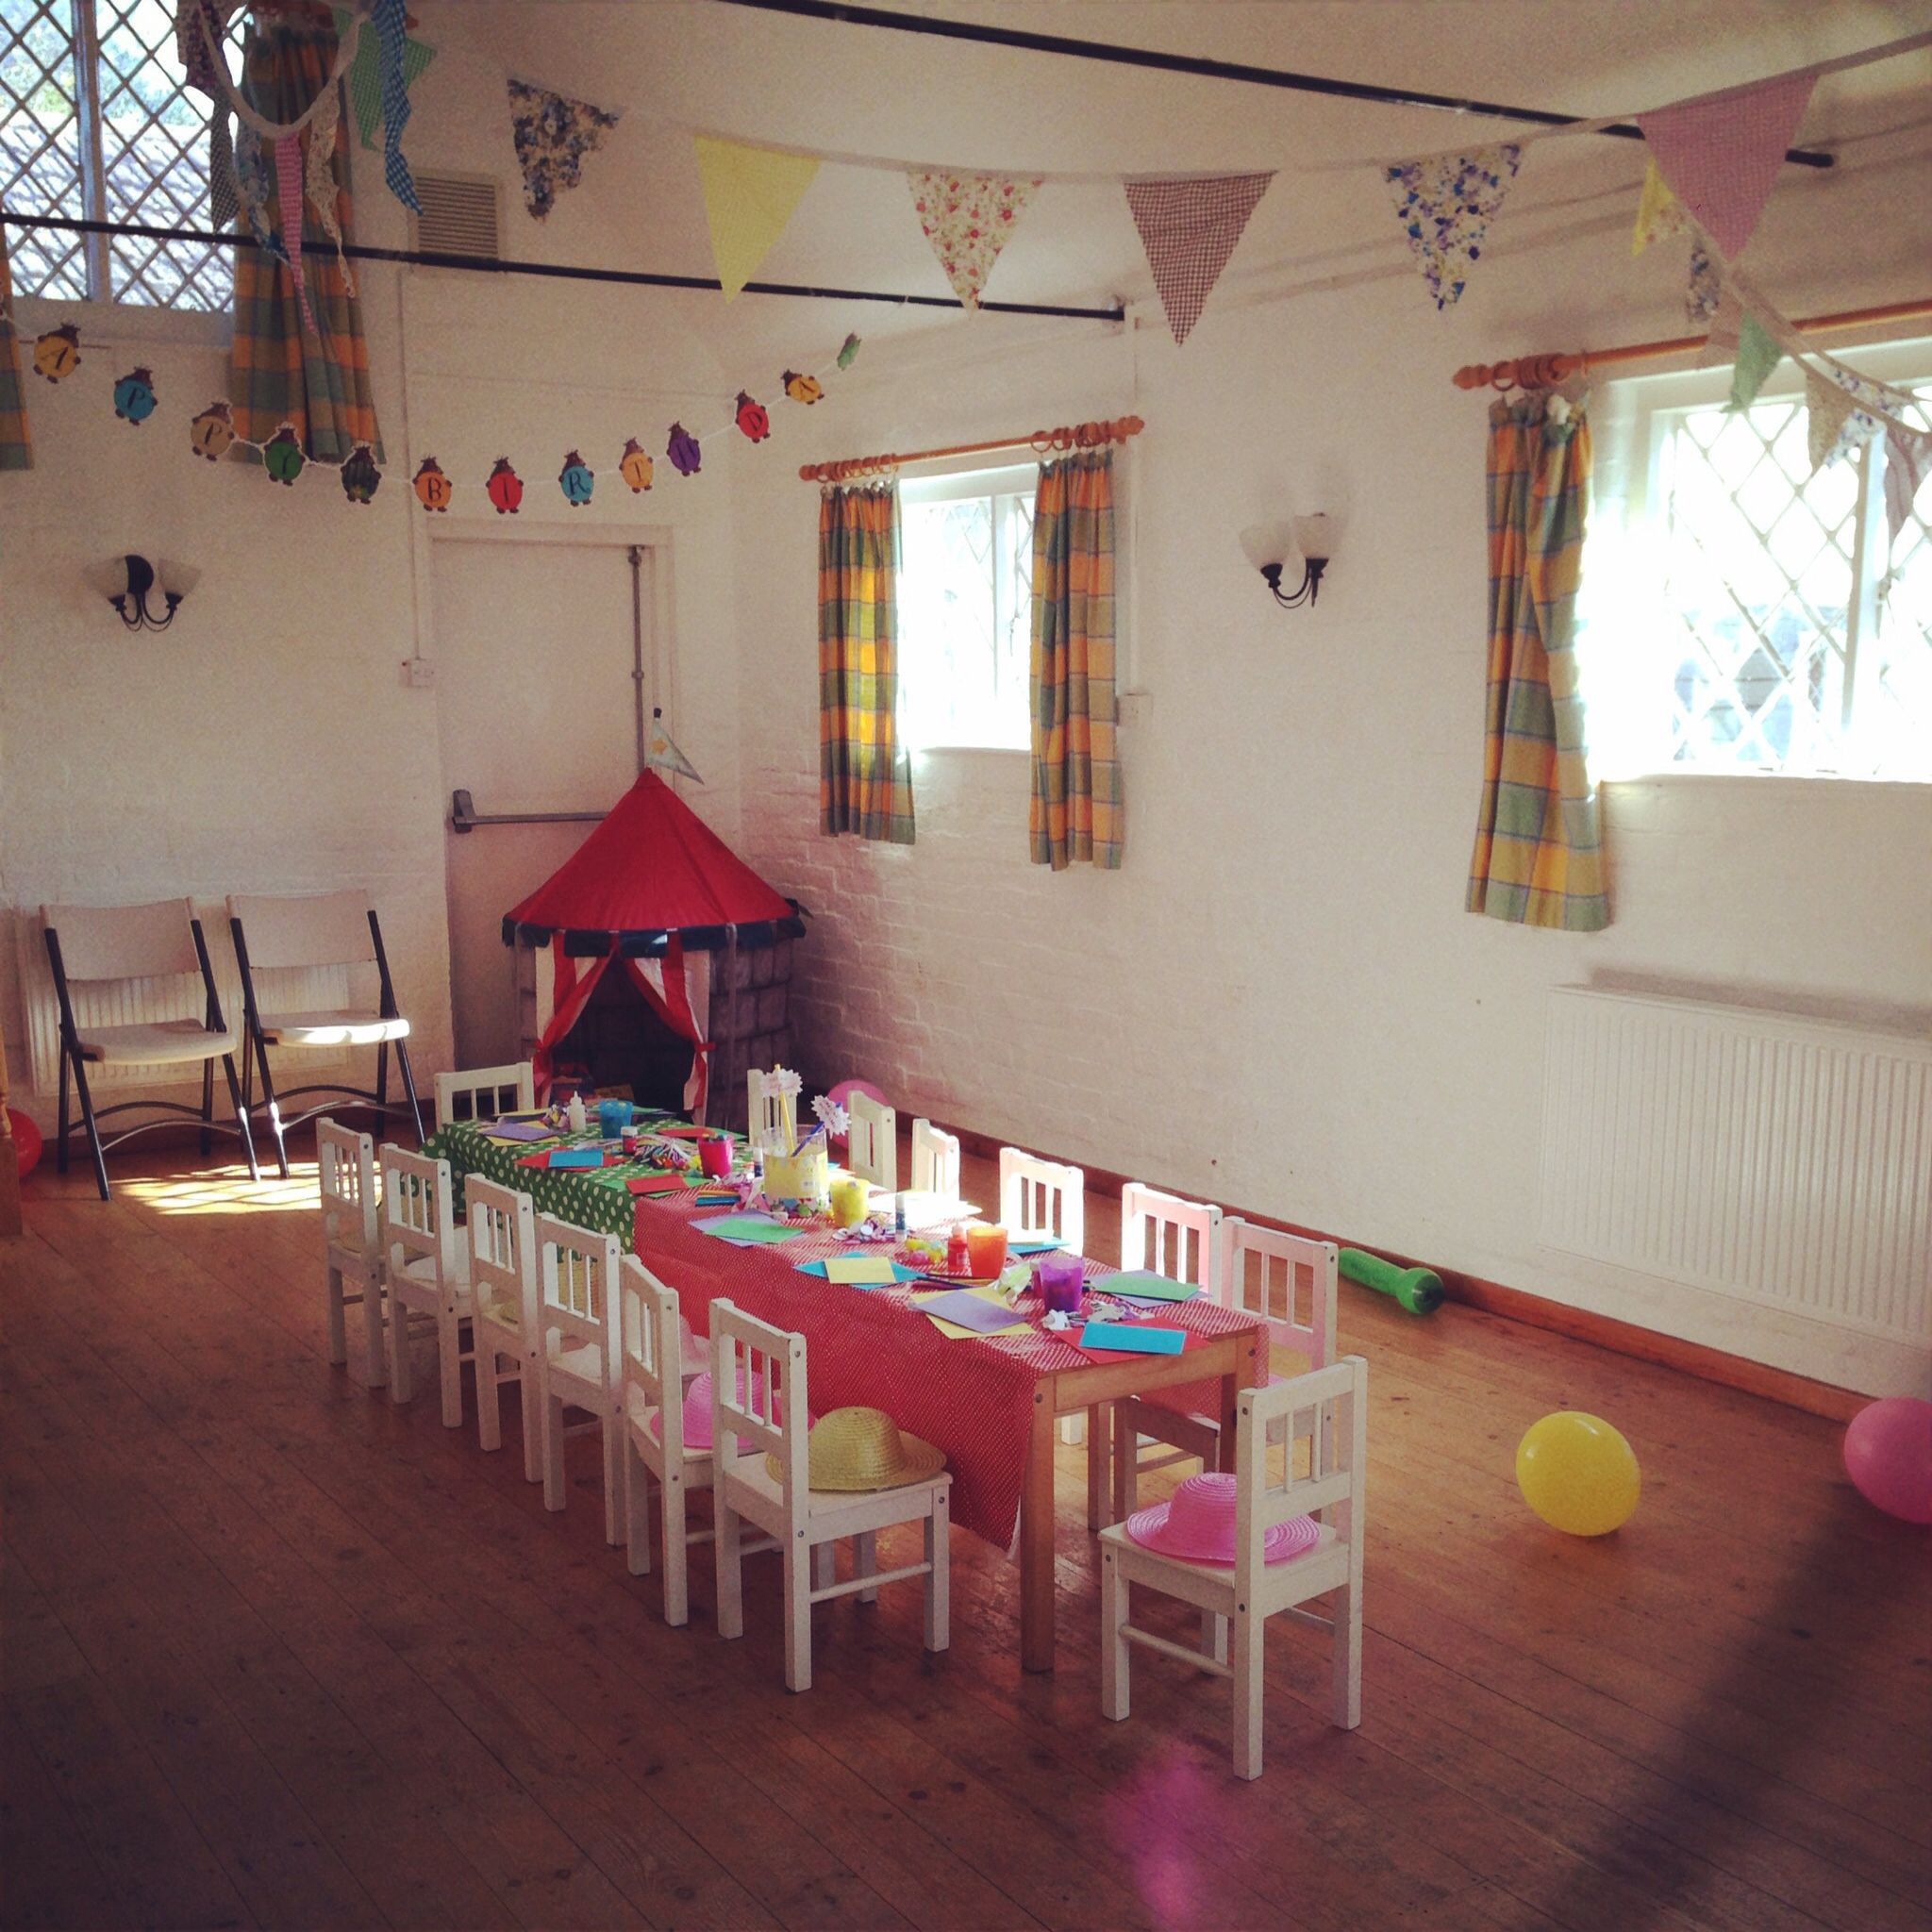 School Easter Party Ideas
 Village Hall toddler s birthday party old school style